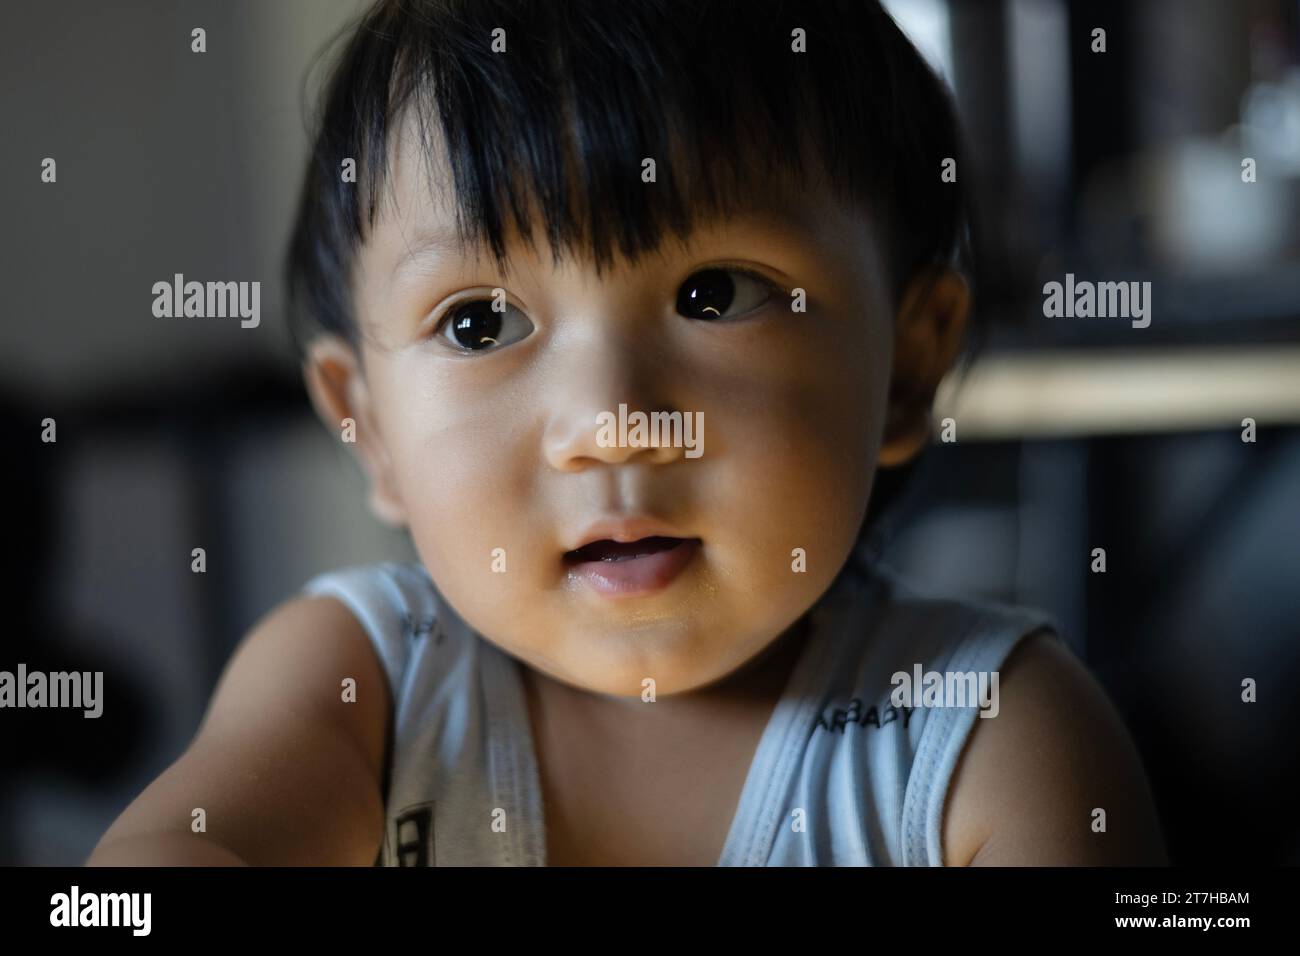 Little Boy Looking Up And Thinking. Close Up Portrait Of Child. Child With Thinking Casually. Stock Photo